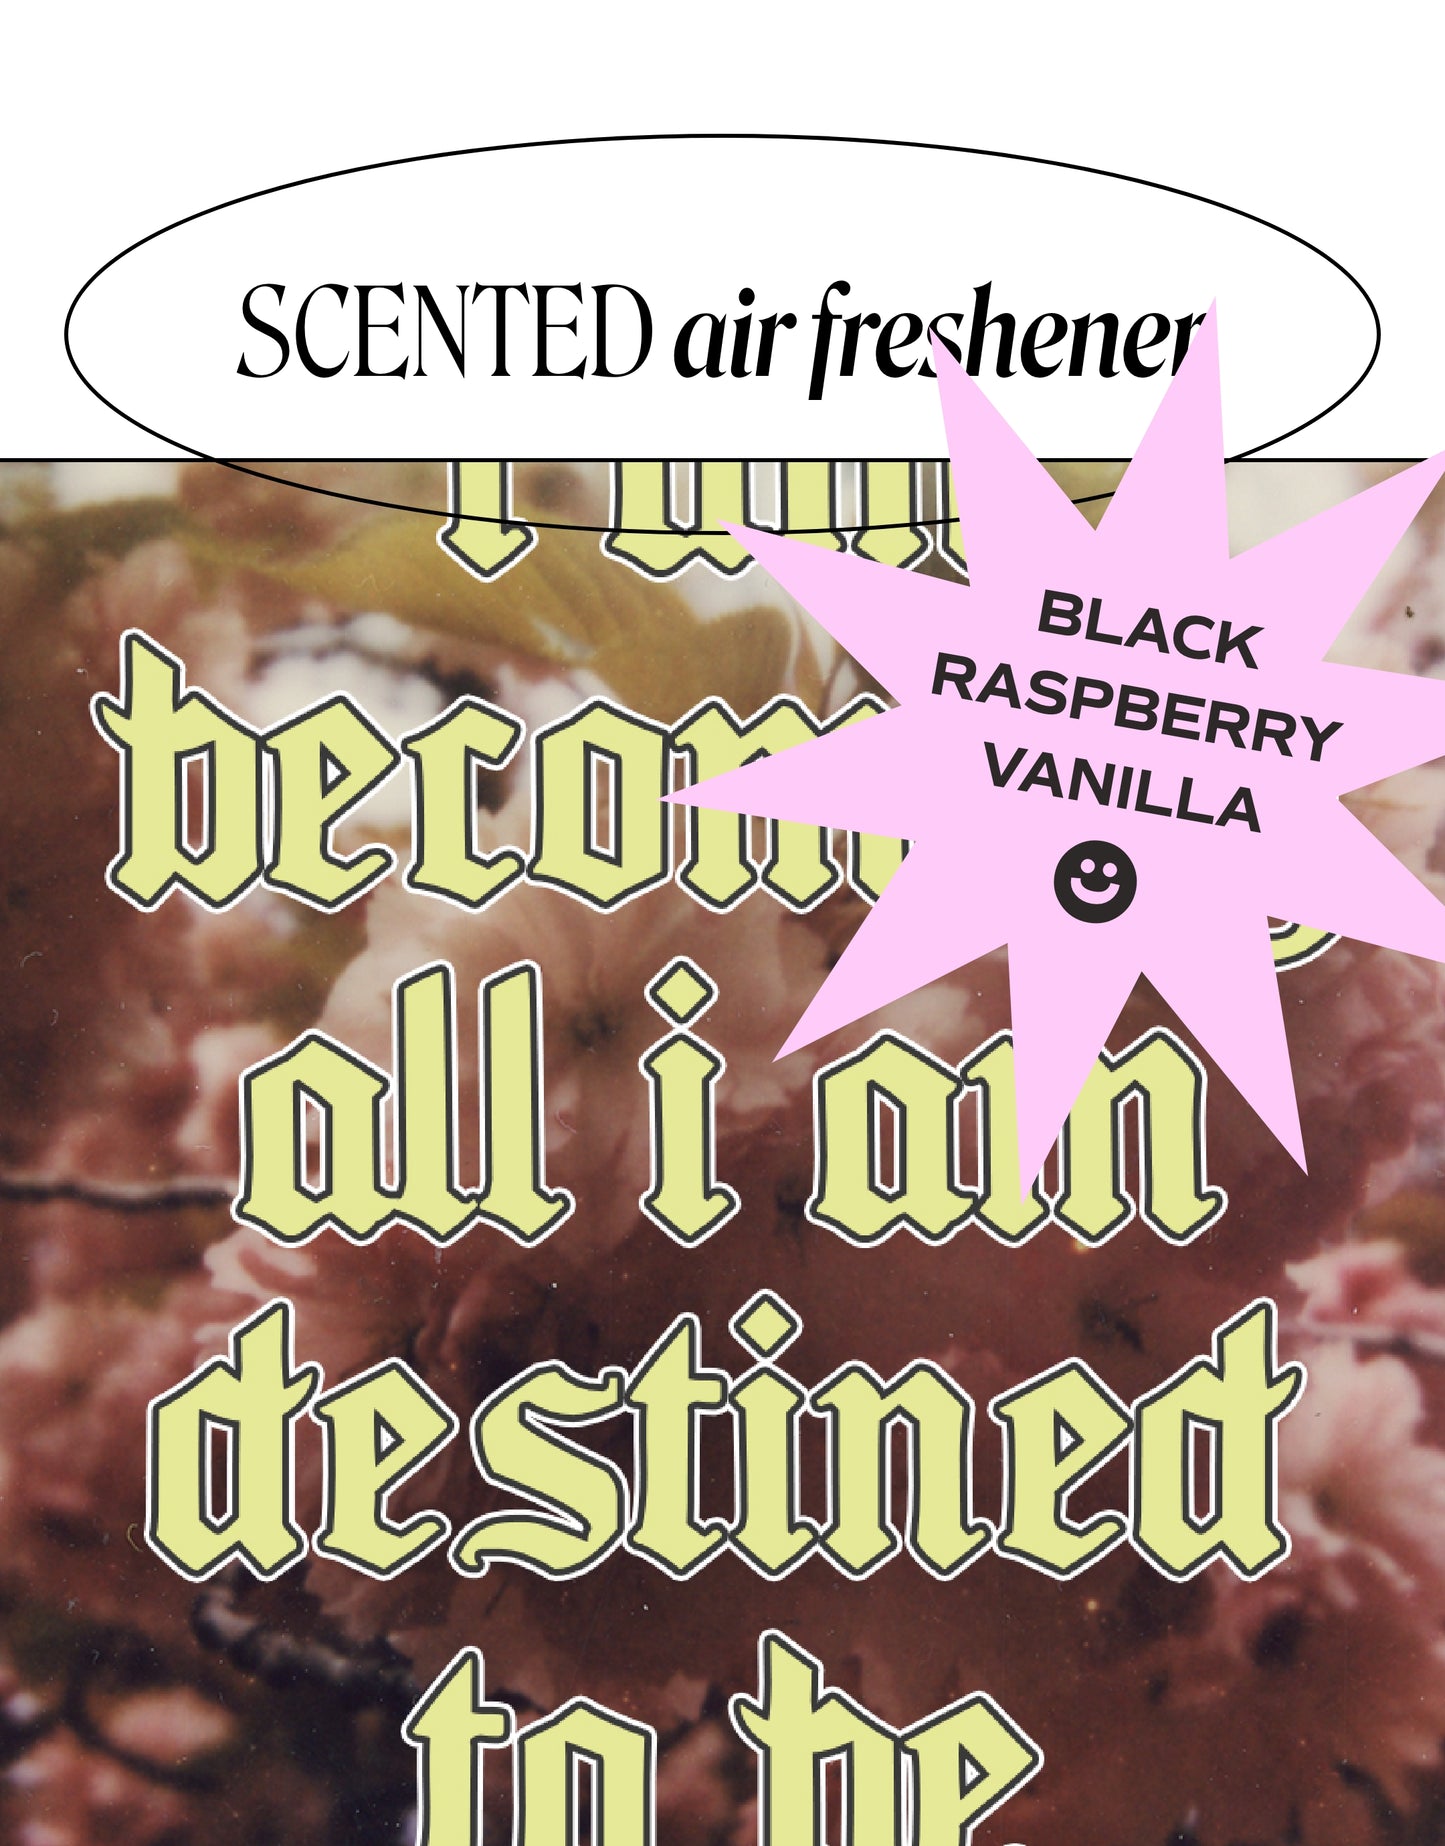 ‘I am becoming all i am destined to be’ air freshener